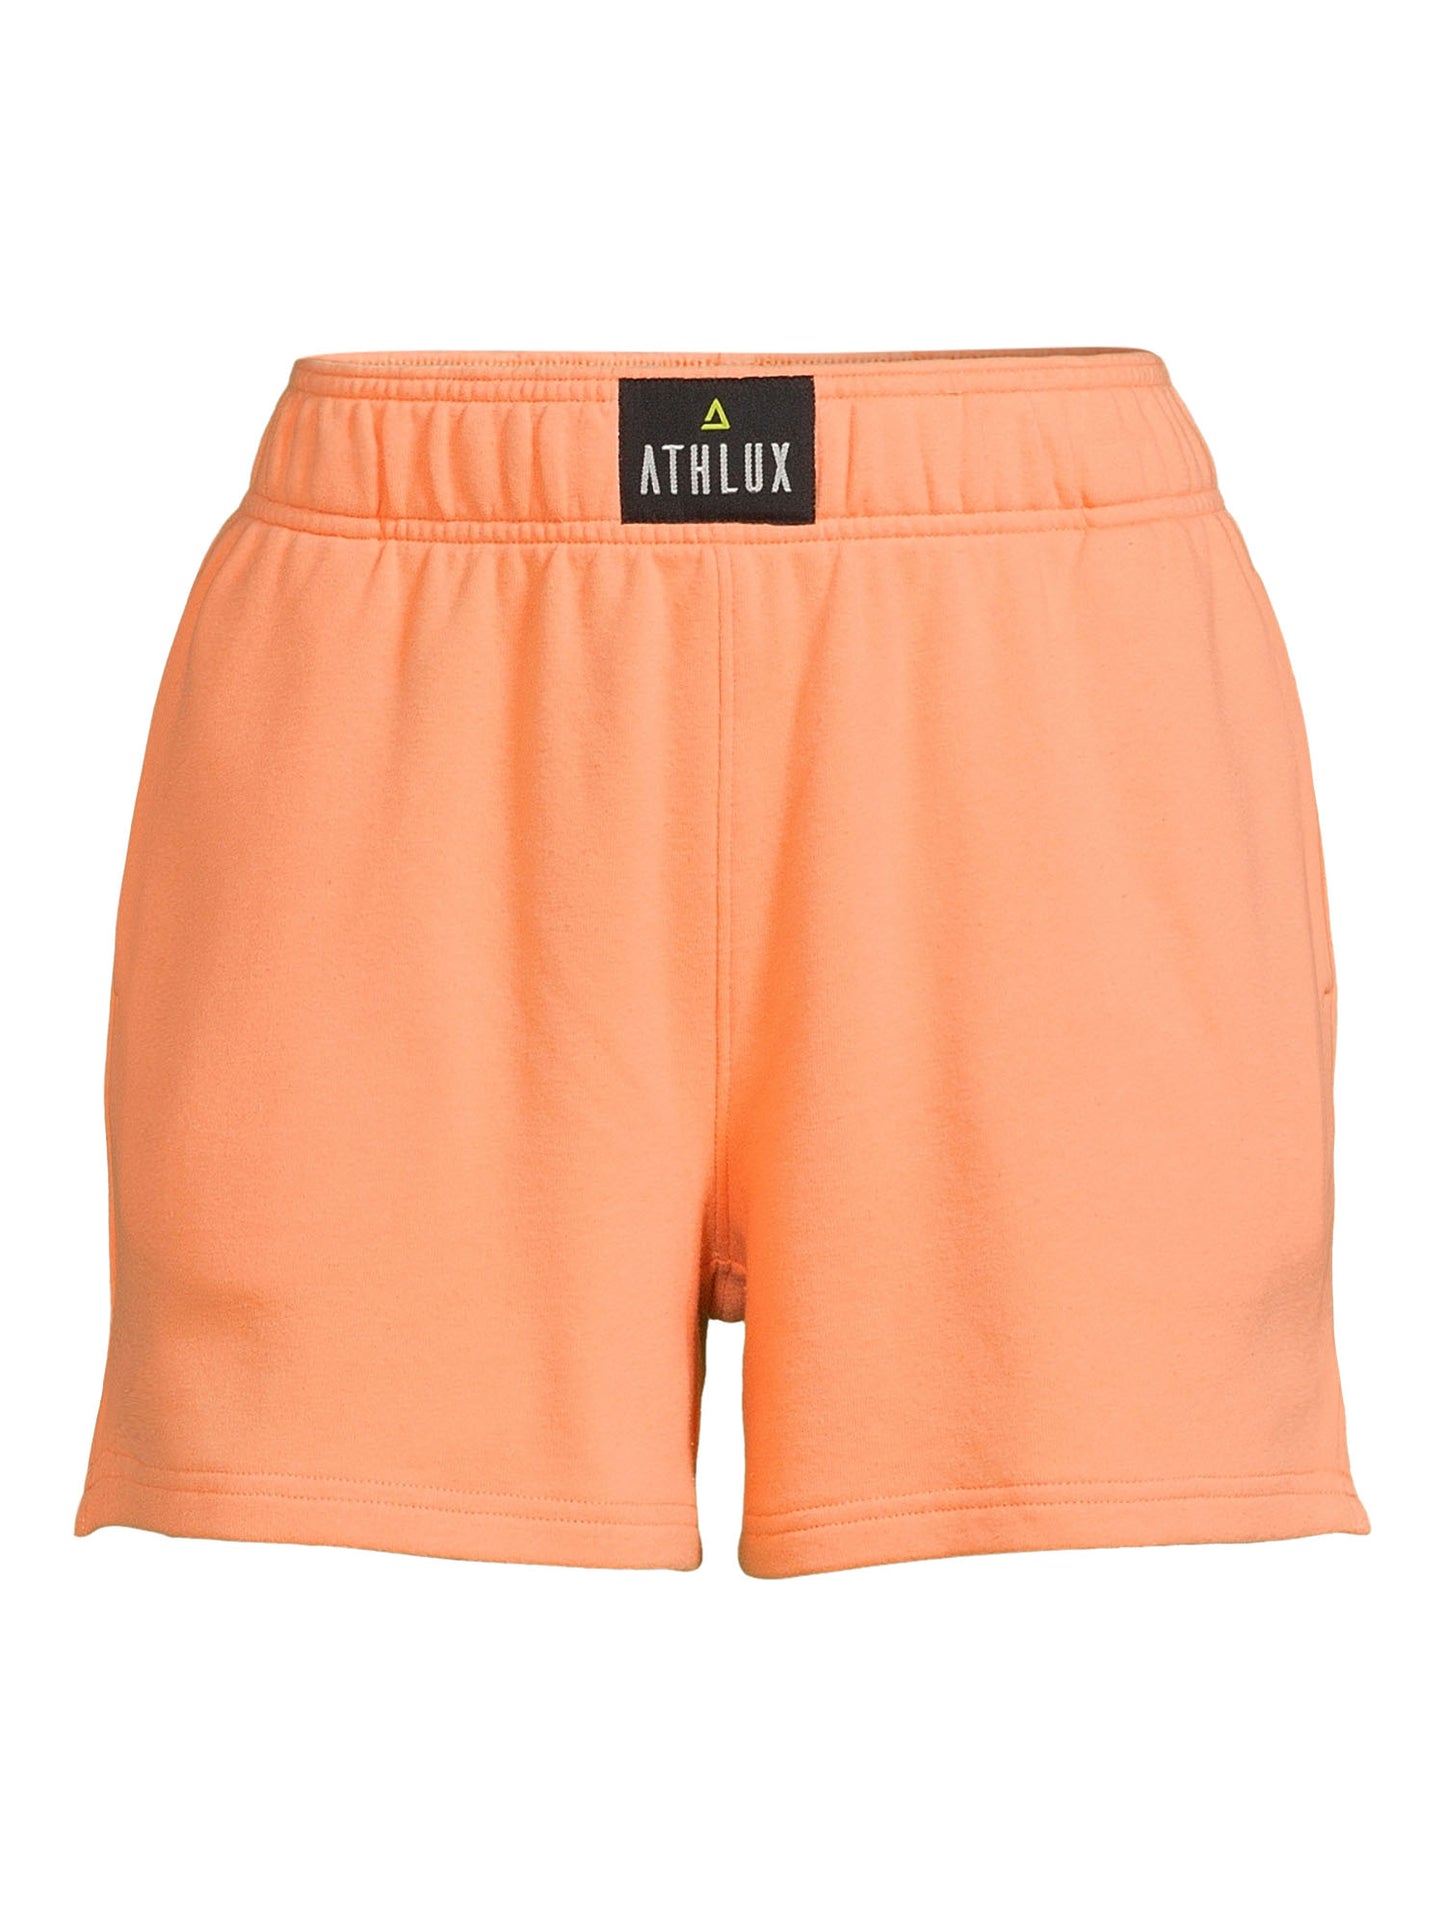 Athlux Womens Active High Waist French Terry Shorts